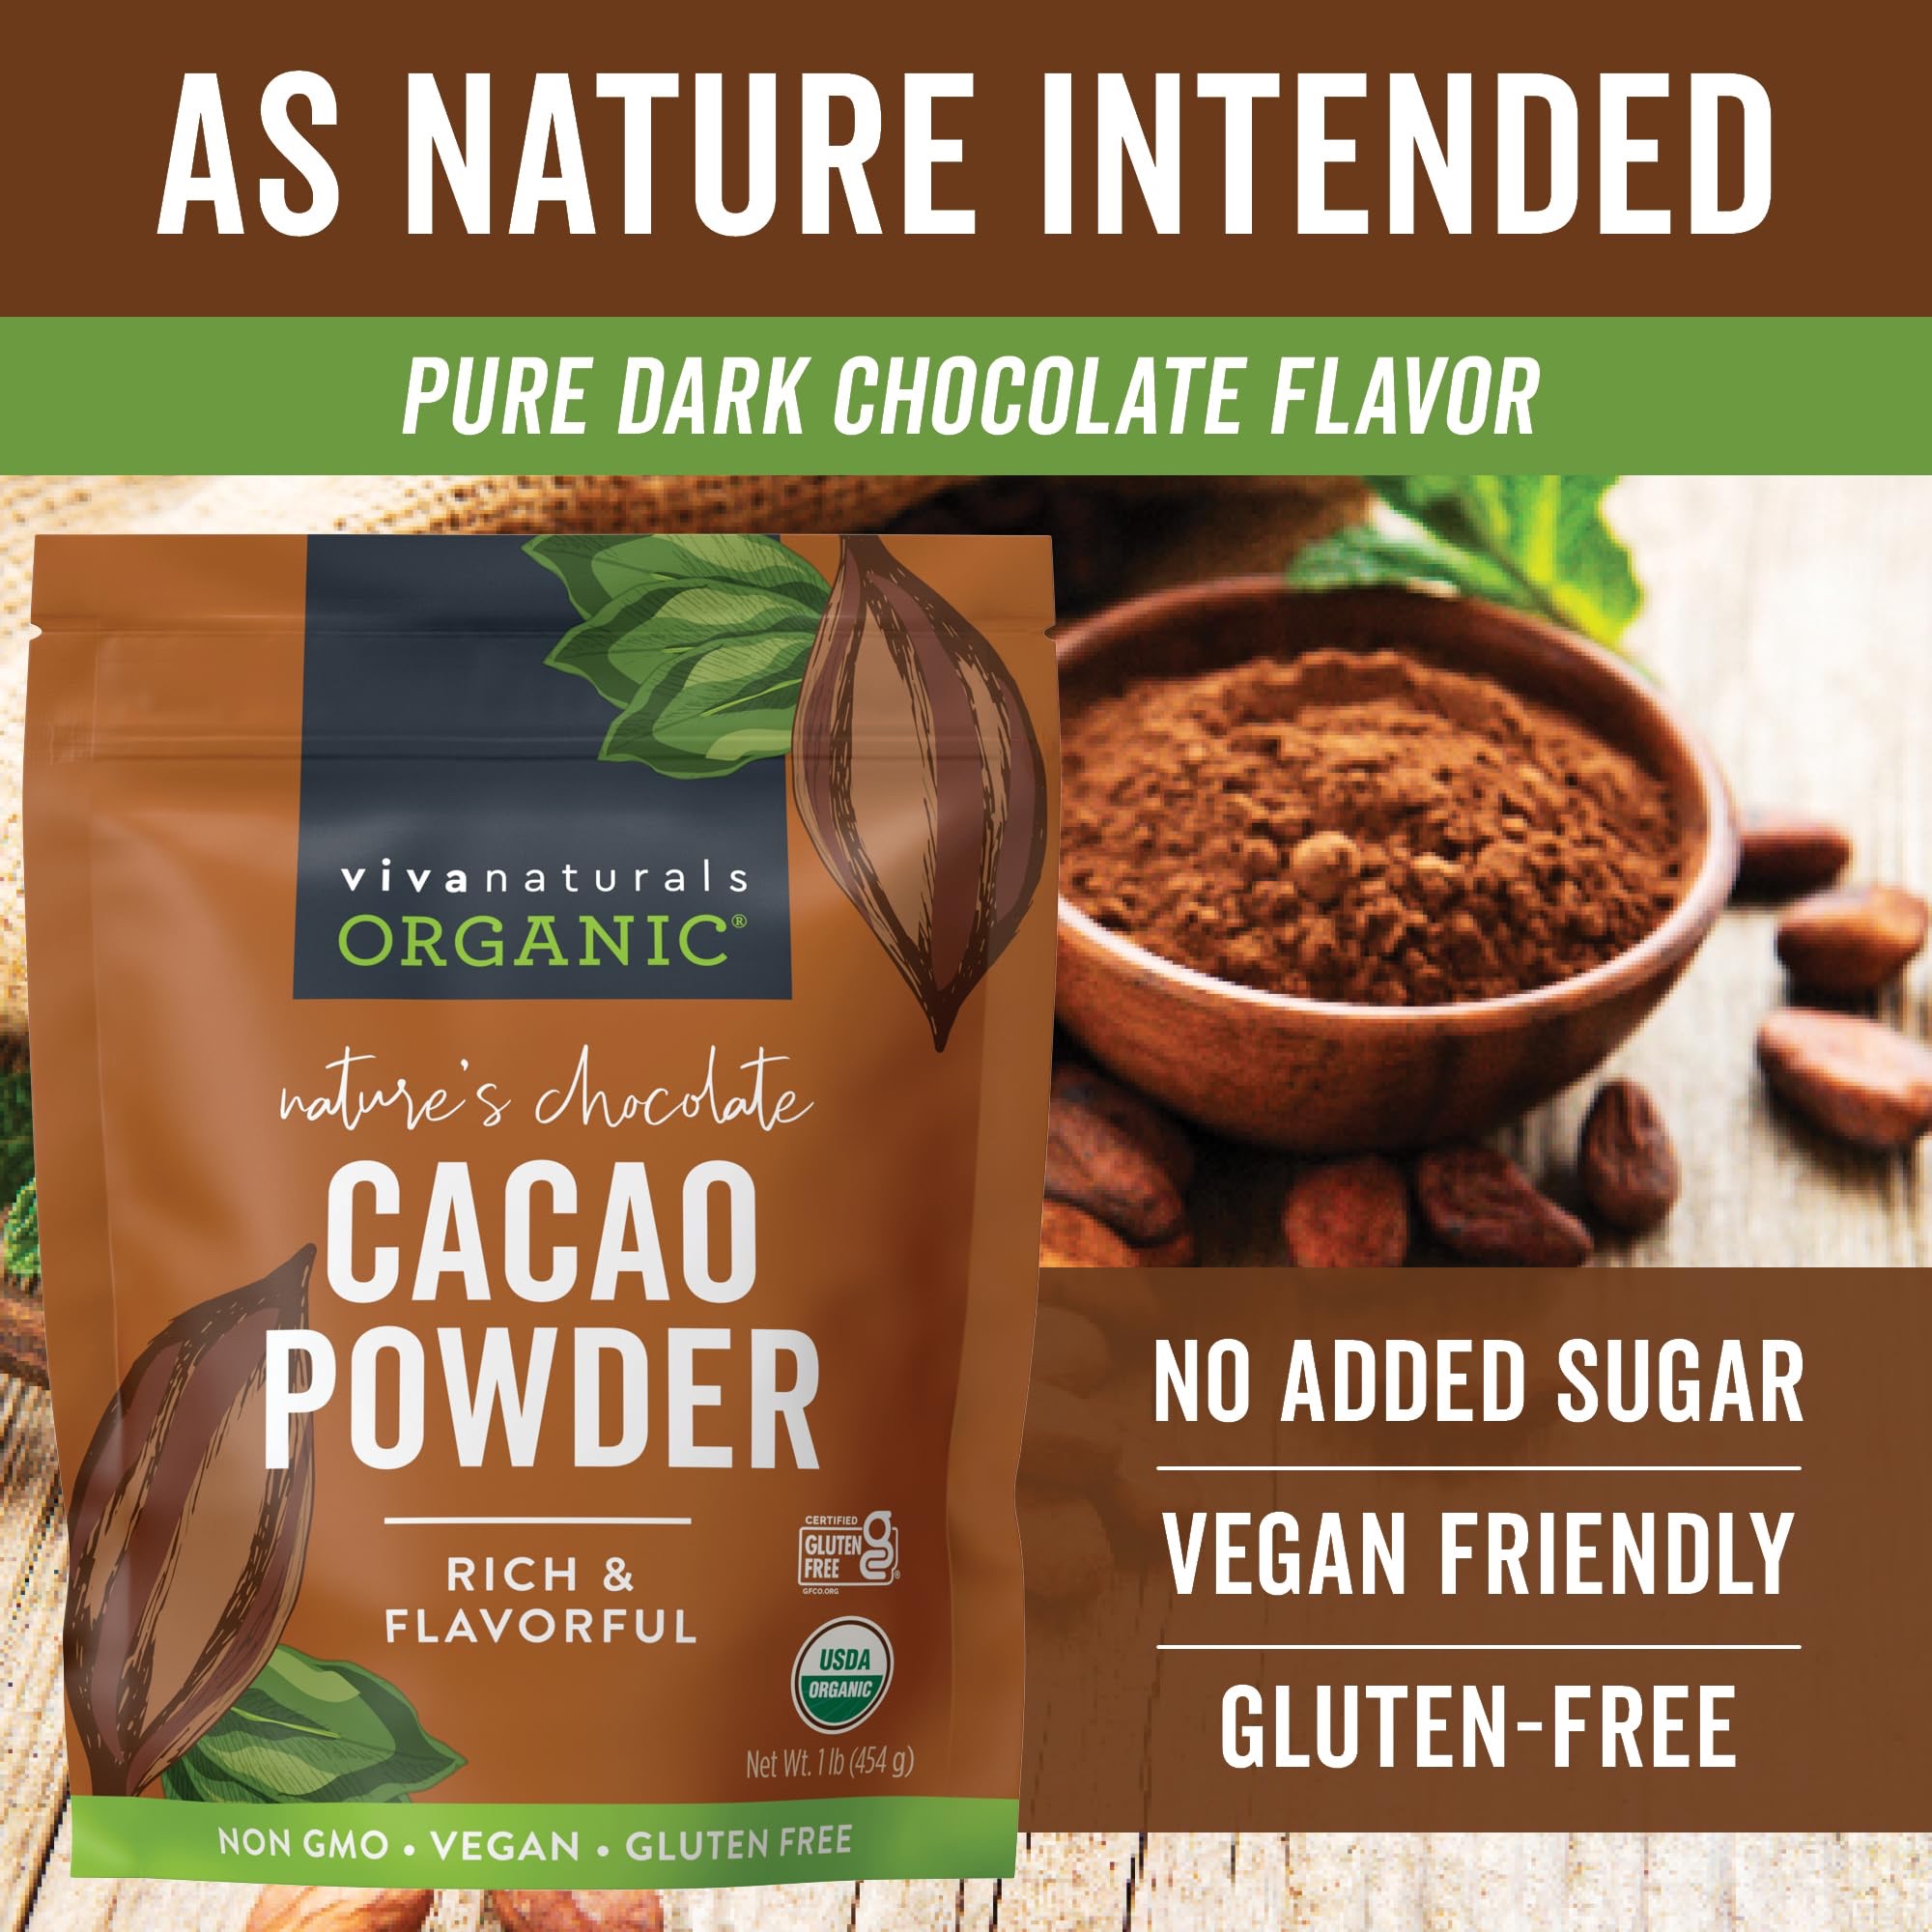 Amazon.com : Viva Naturals Organic Cacao Powder, 1lb - Unsweetened Cacao Powder With Rich Dark Chocolate Flavor, Perfect for Baking & Smoothies, Non-GMO, Certified Vegan & Gluten-Free, 454 g : Grocery